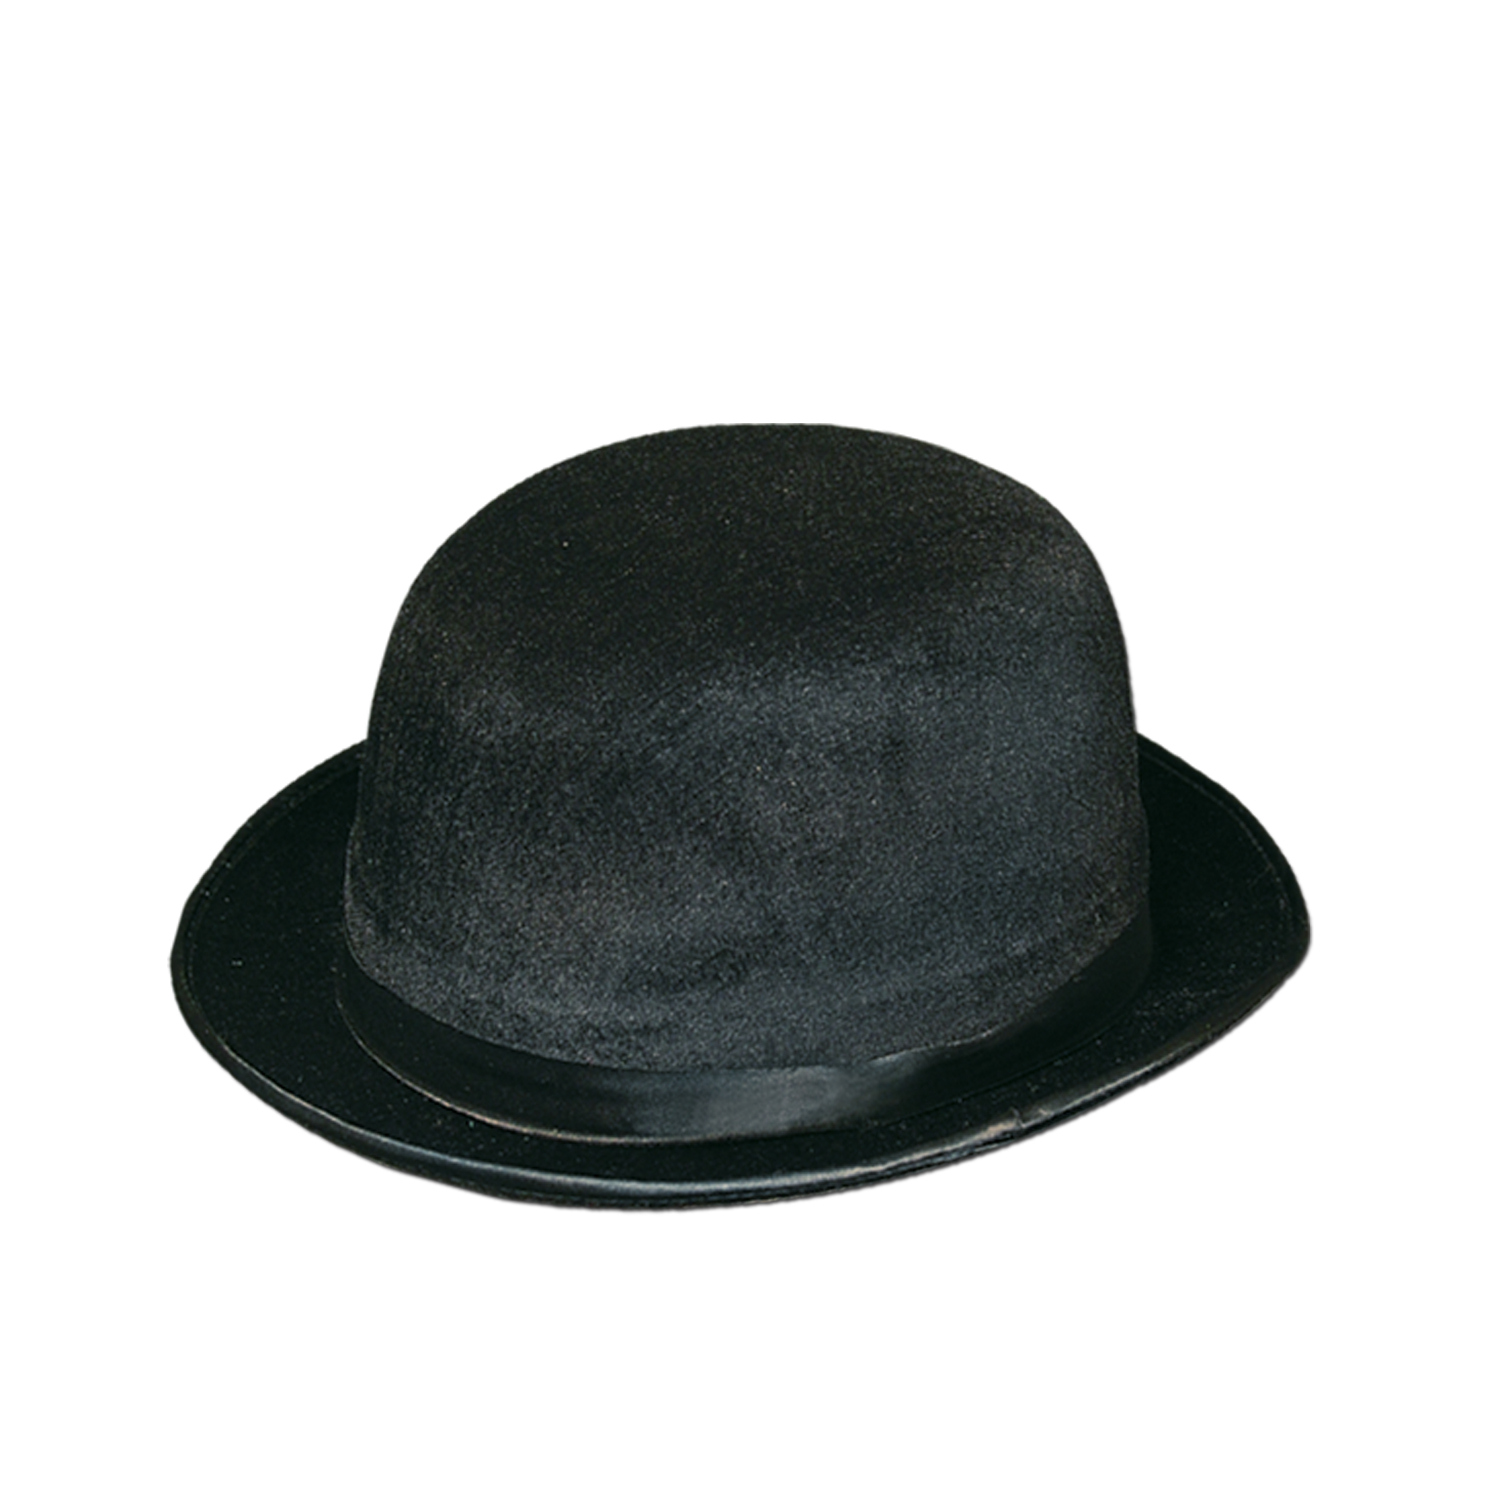 Plastic molded derby hat with velour coating and a silk like band.